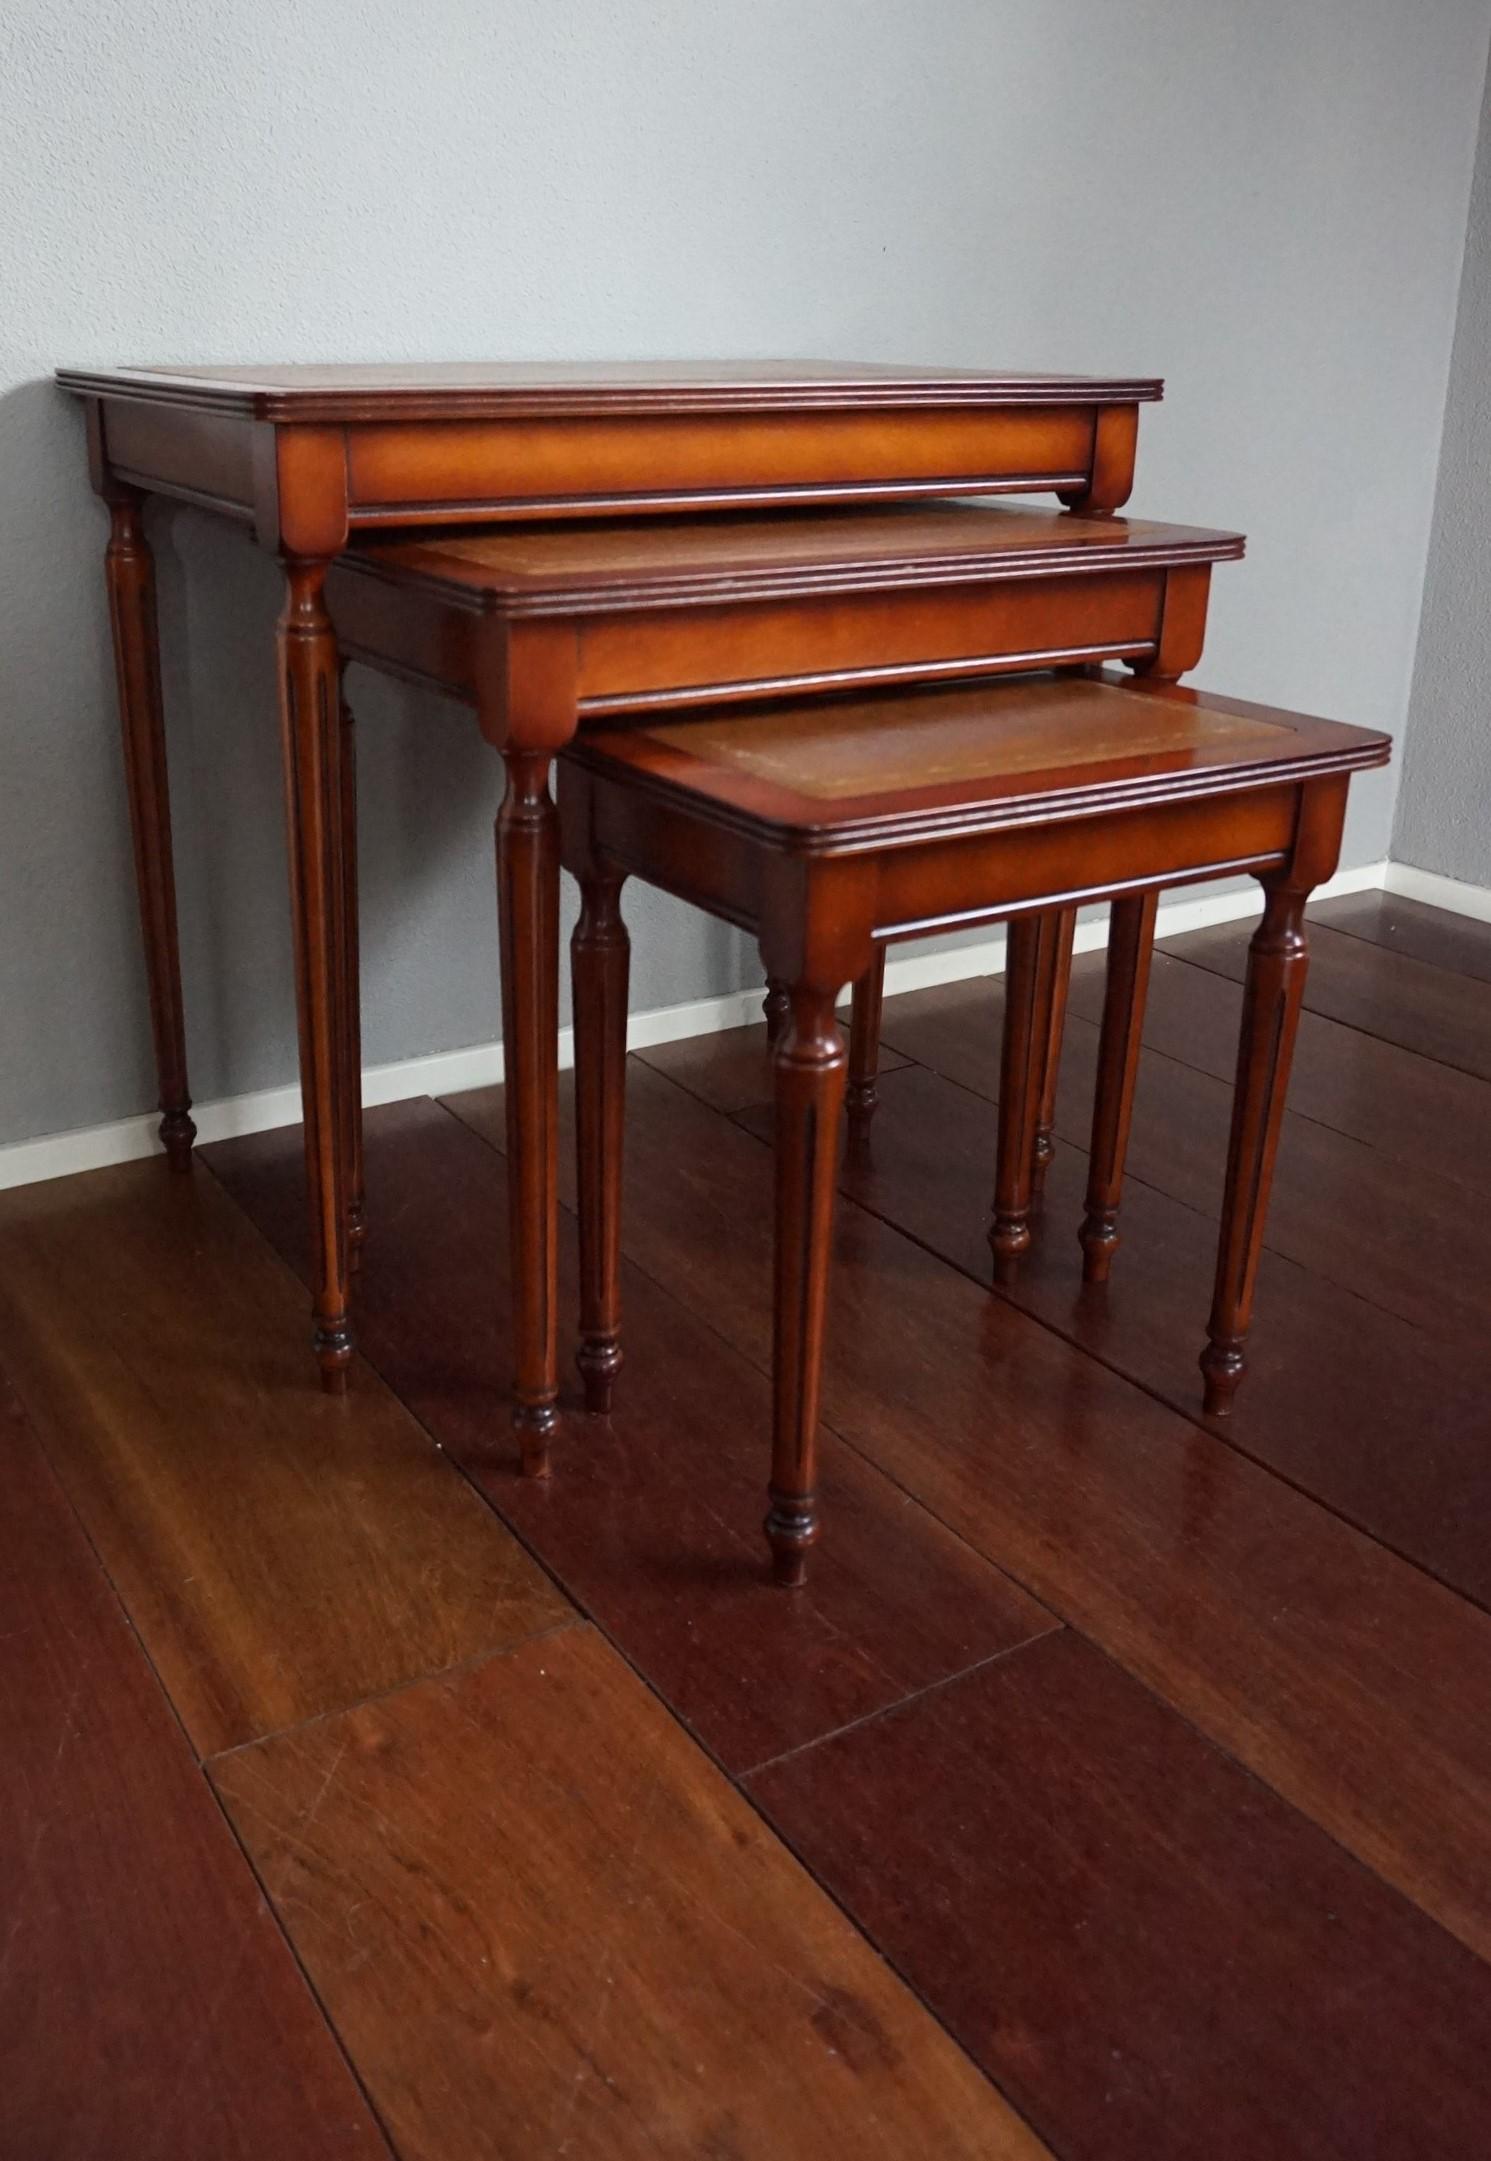 Louis XVI Antique Look Mahogany Louis Seize Style Nest of Three Tables with Leather Inlay